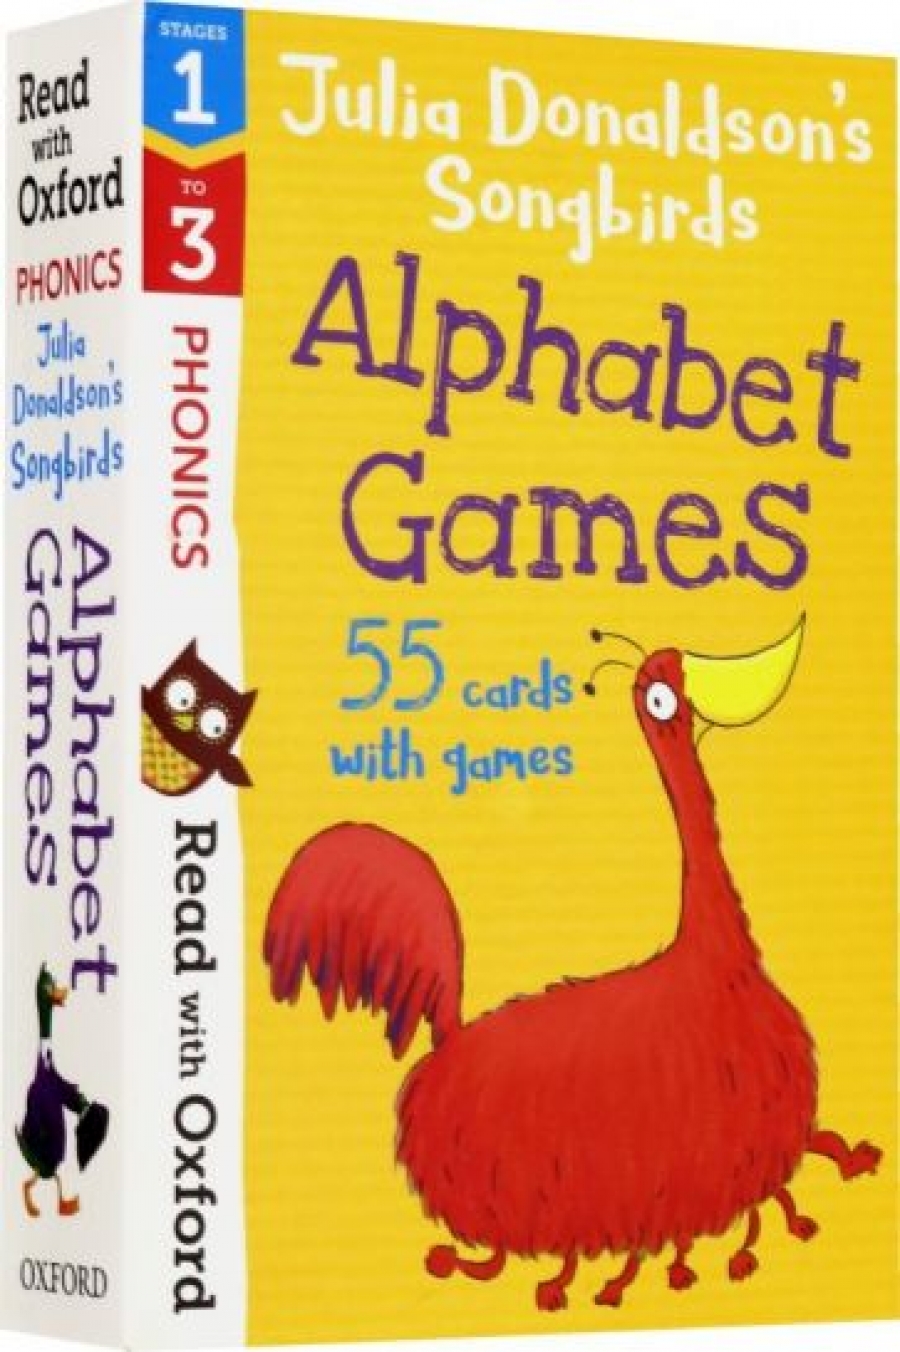 Donaldson Julia, Kirtley Clare Read with Oxf: Stages 1-3. Julia Donaldson's Songbirds: Alphabet Games Flashcards 